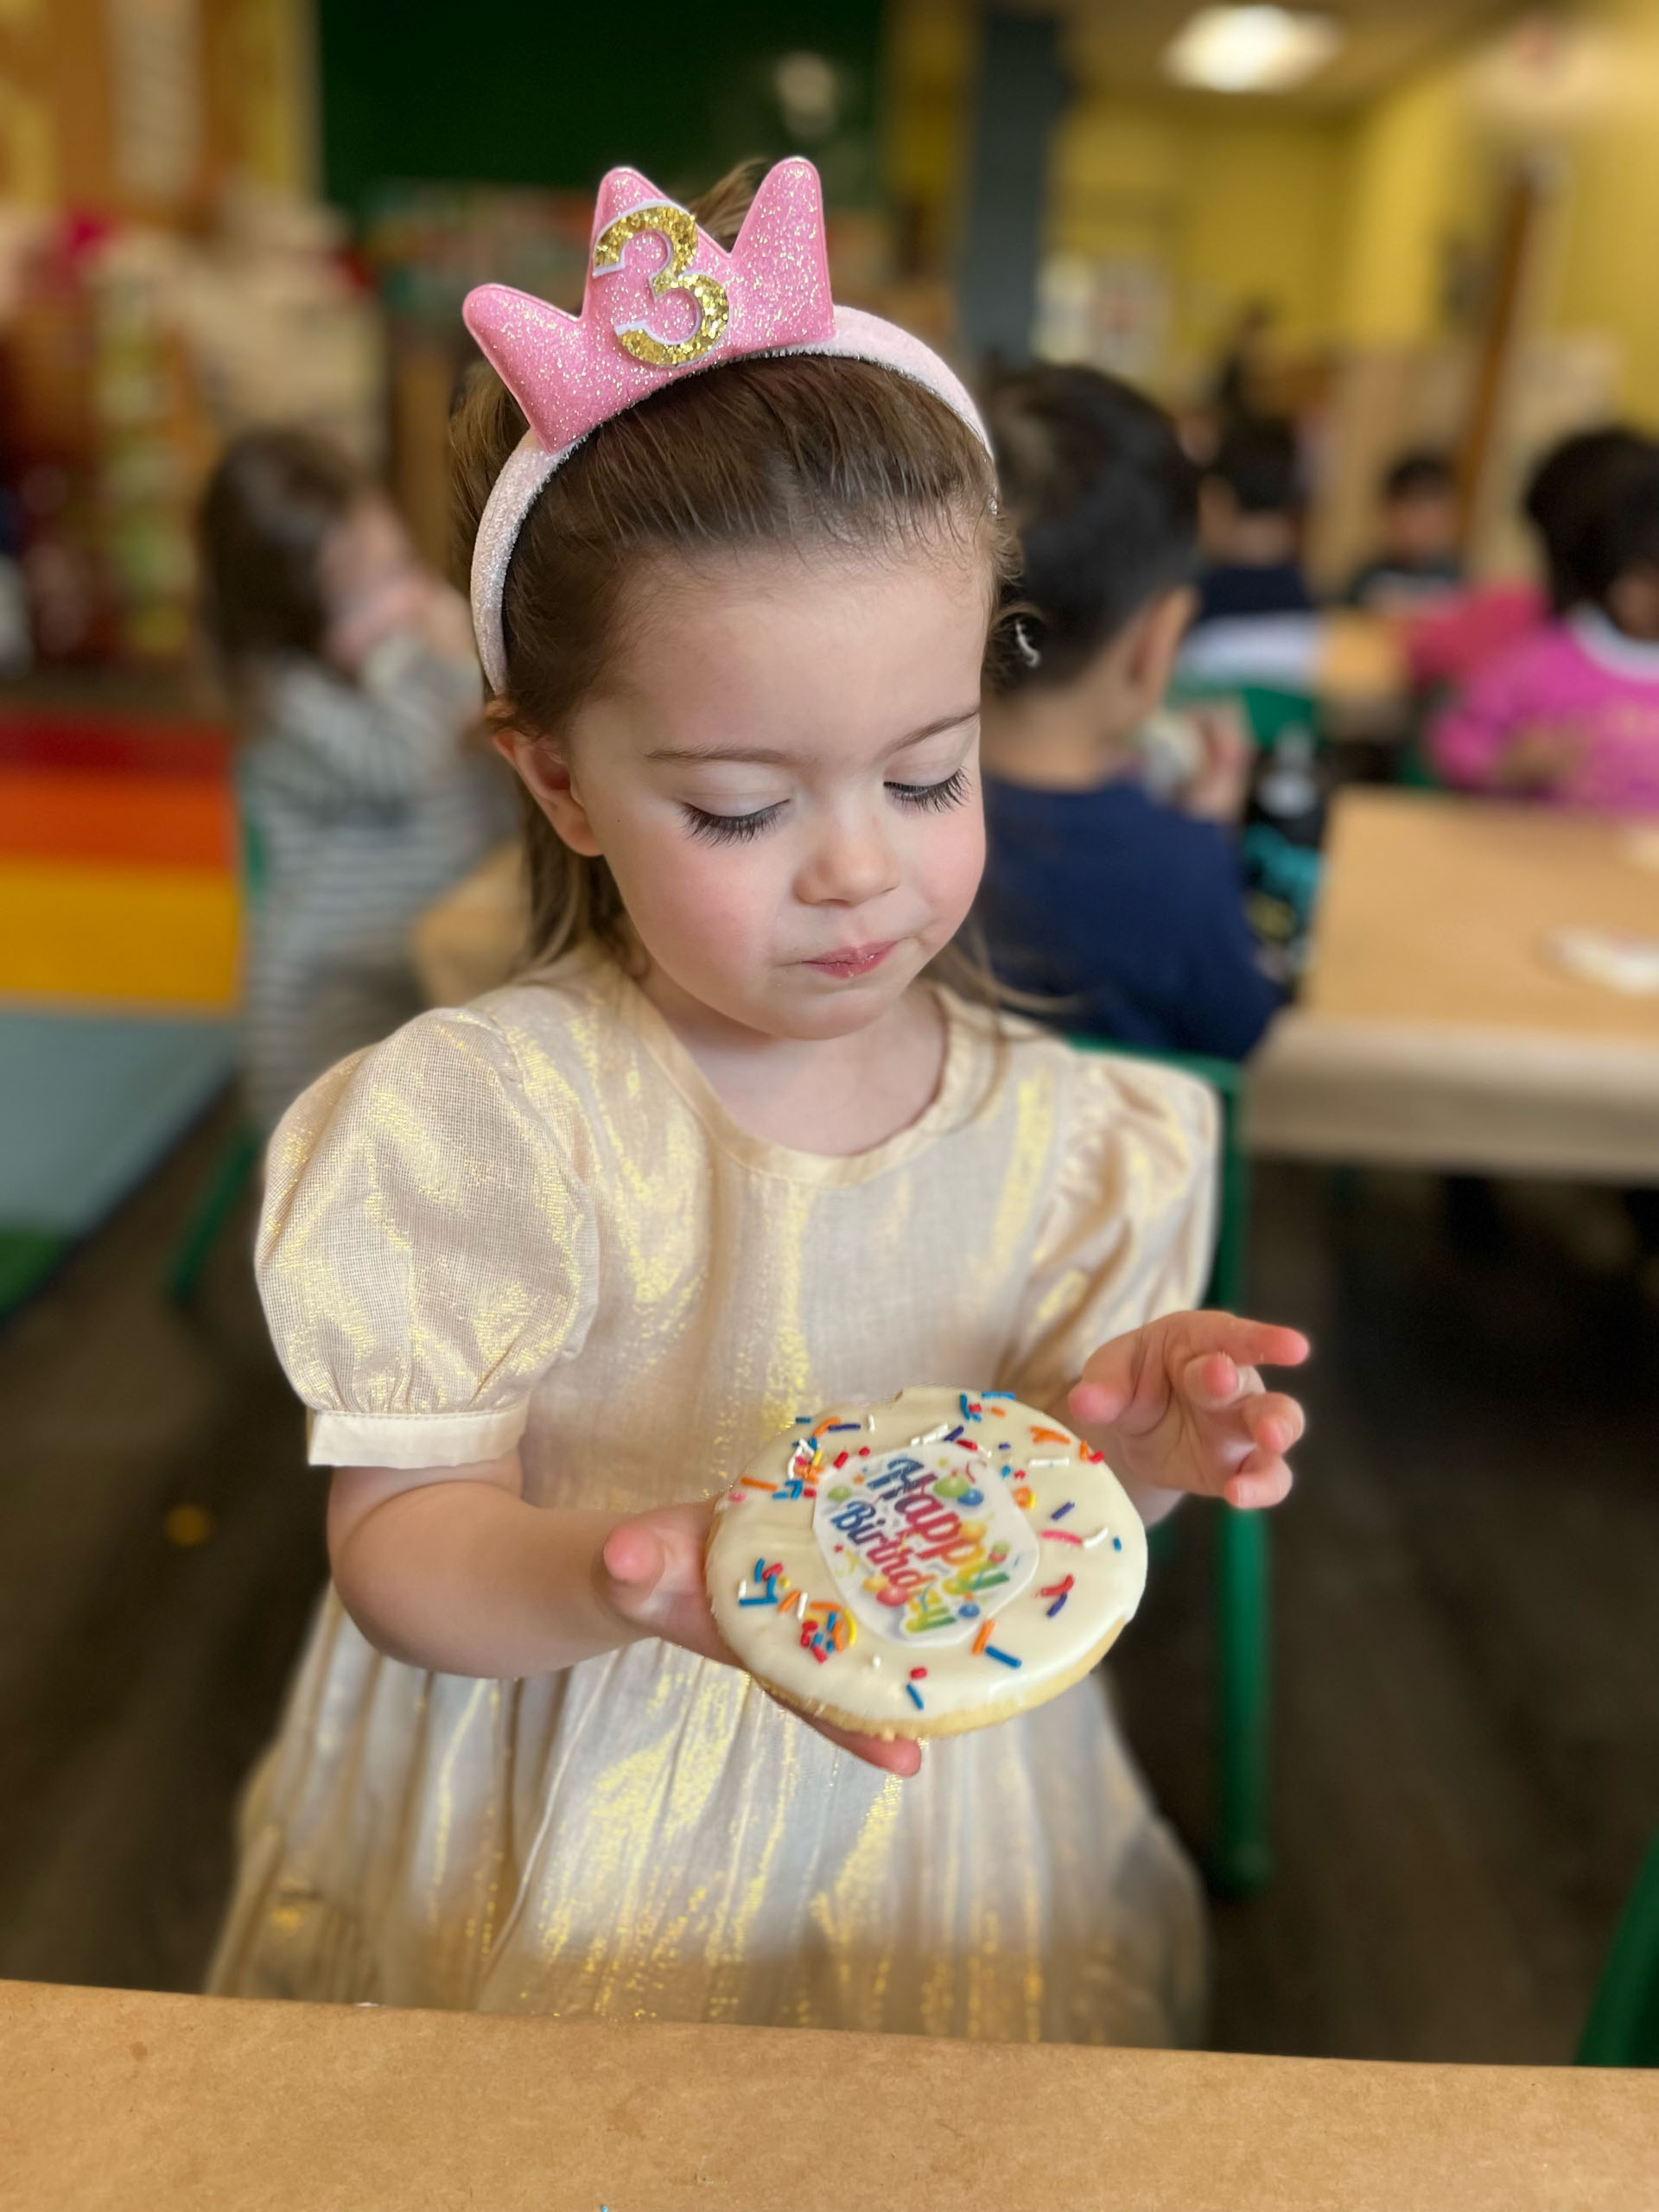 A little girl holding a cookie in front of a table.